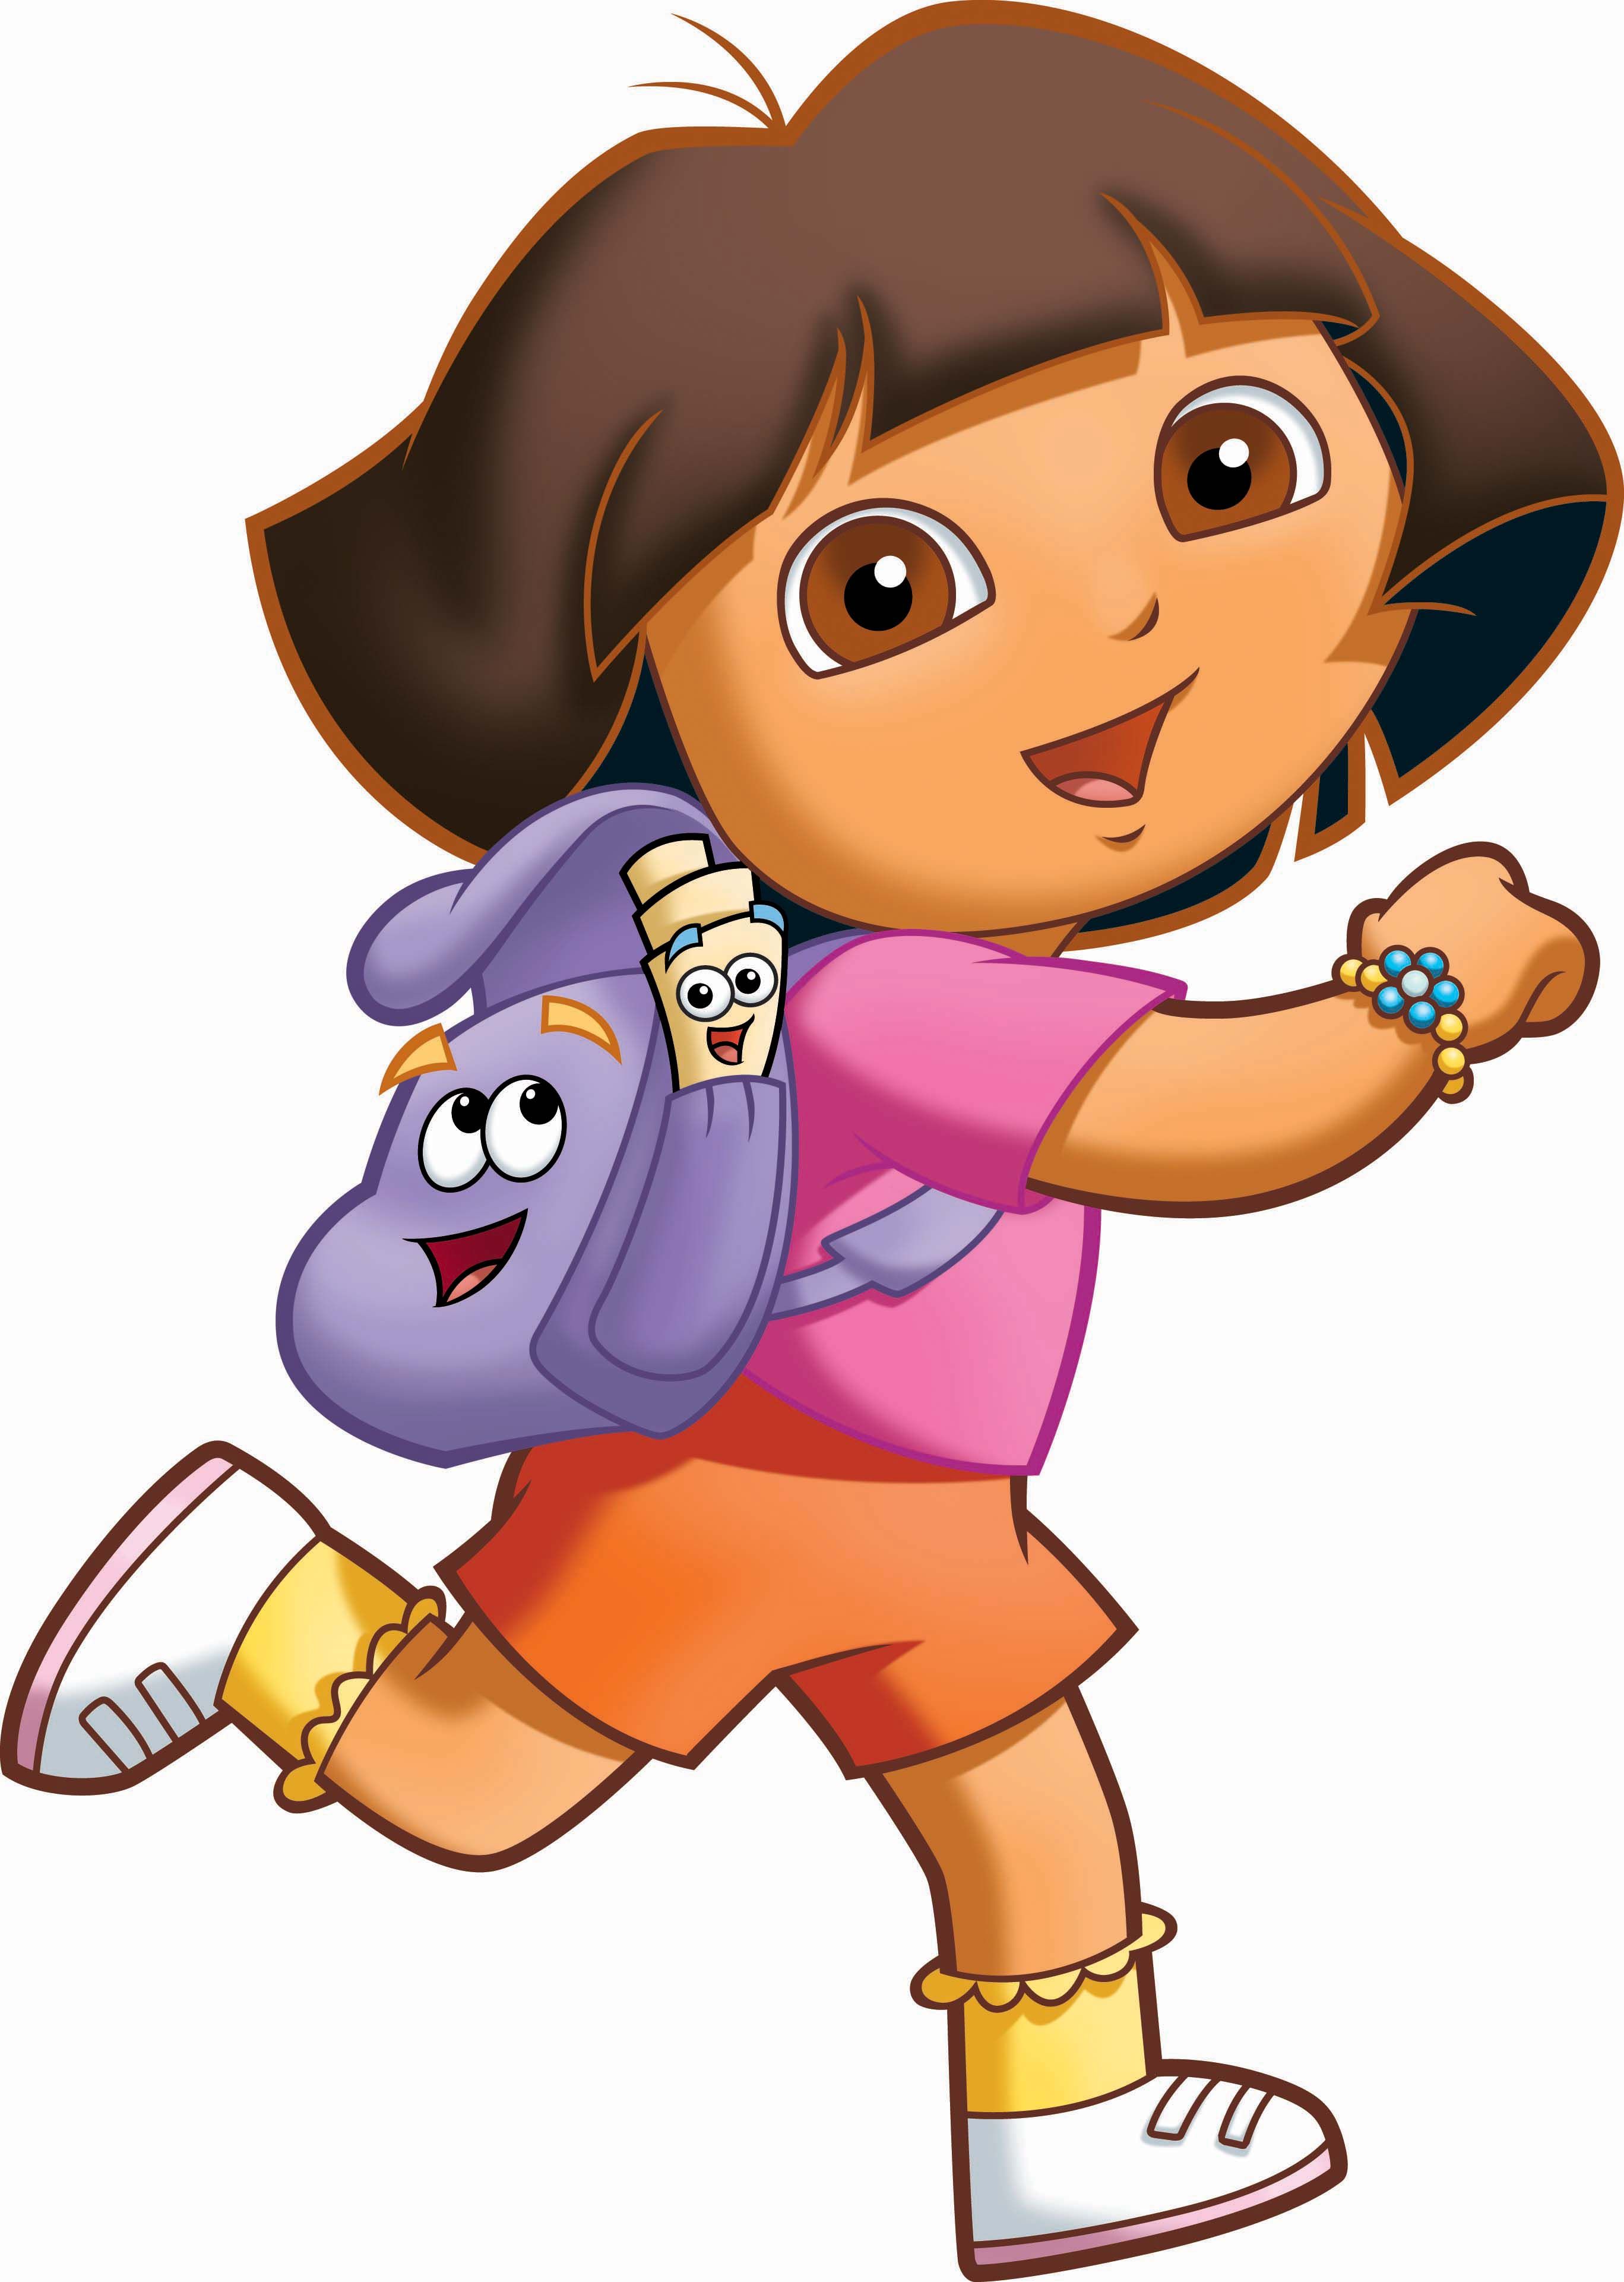 Dora the Explorer is able to keep young mind interested and